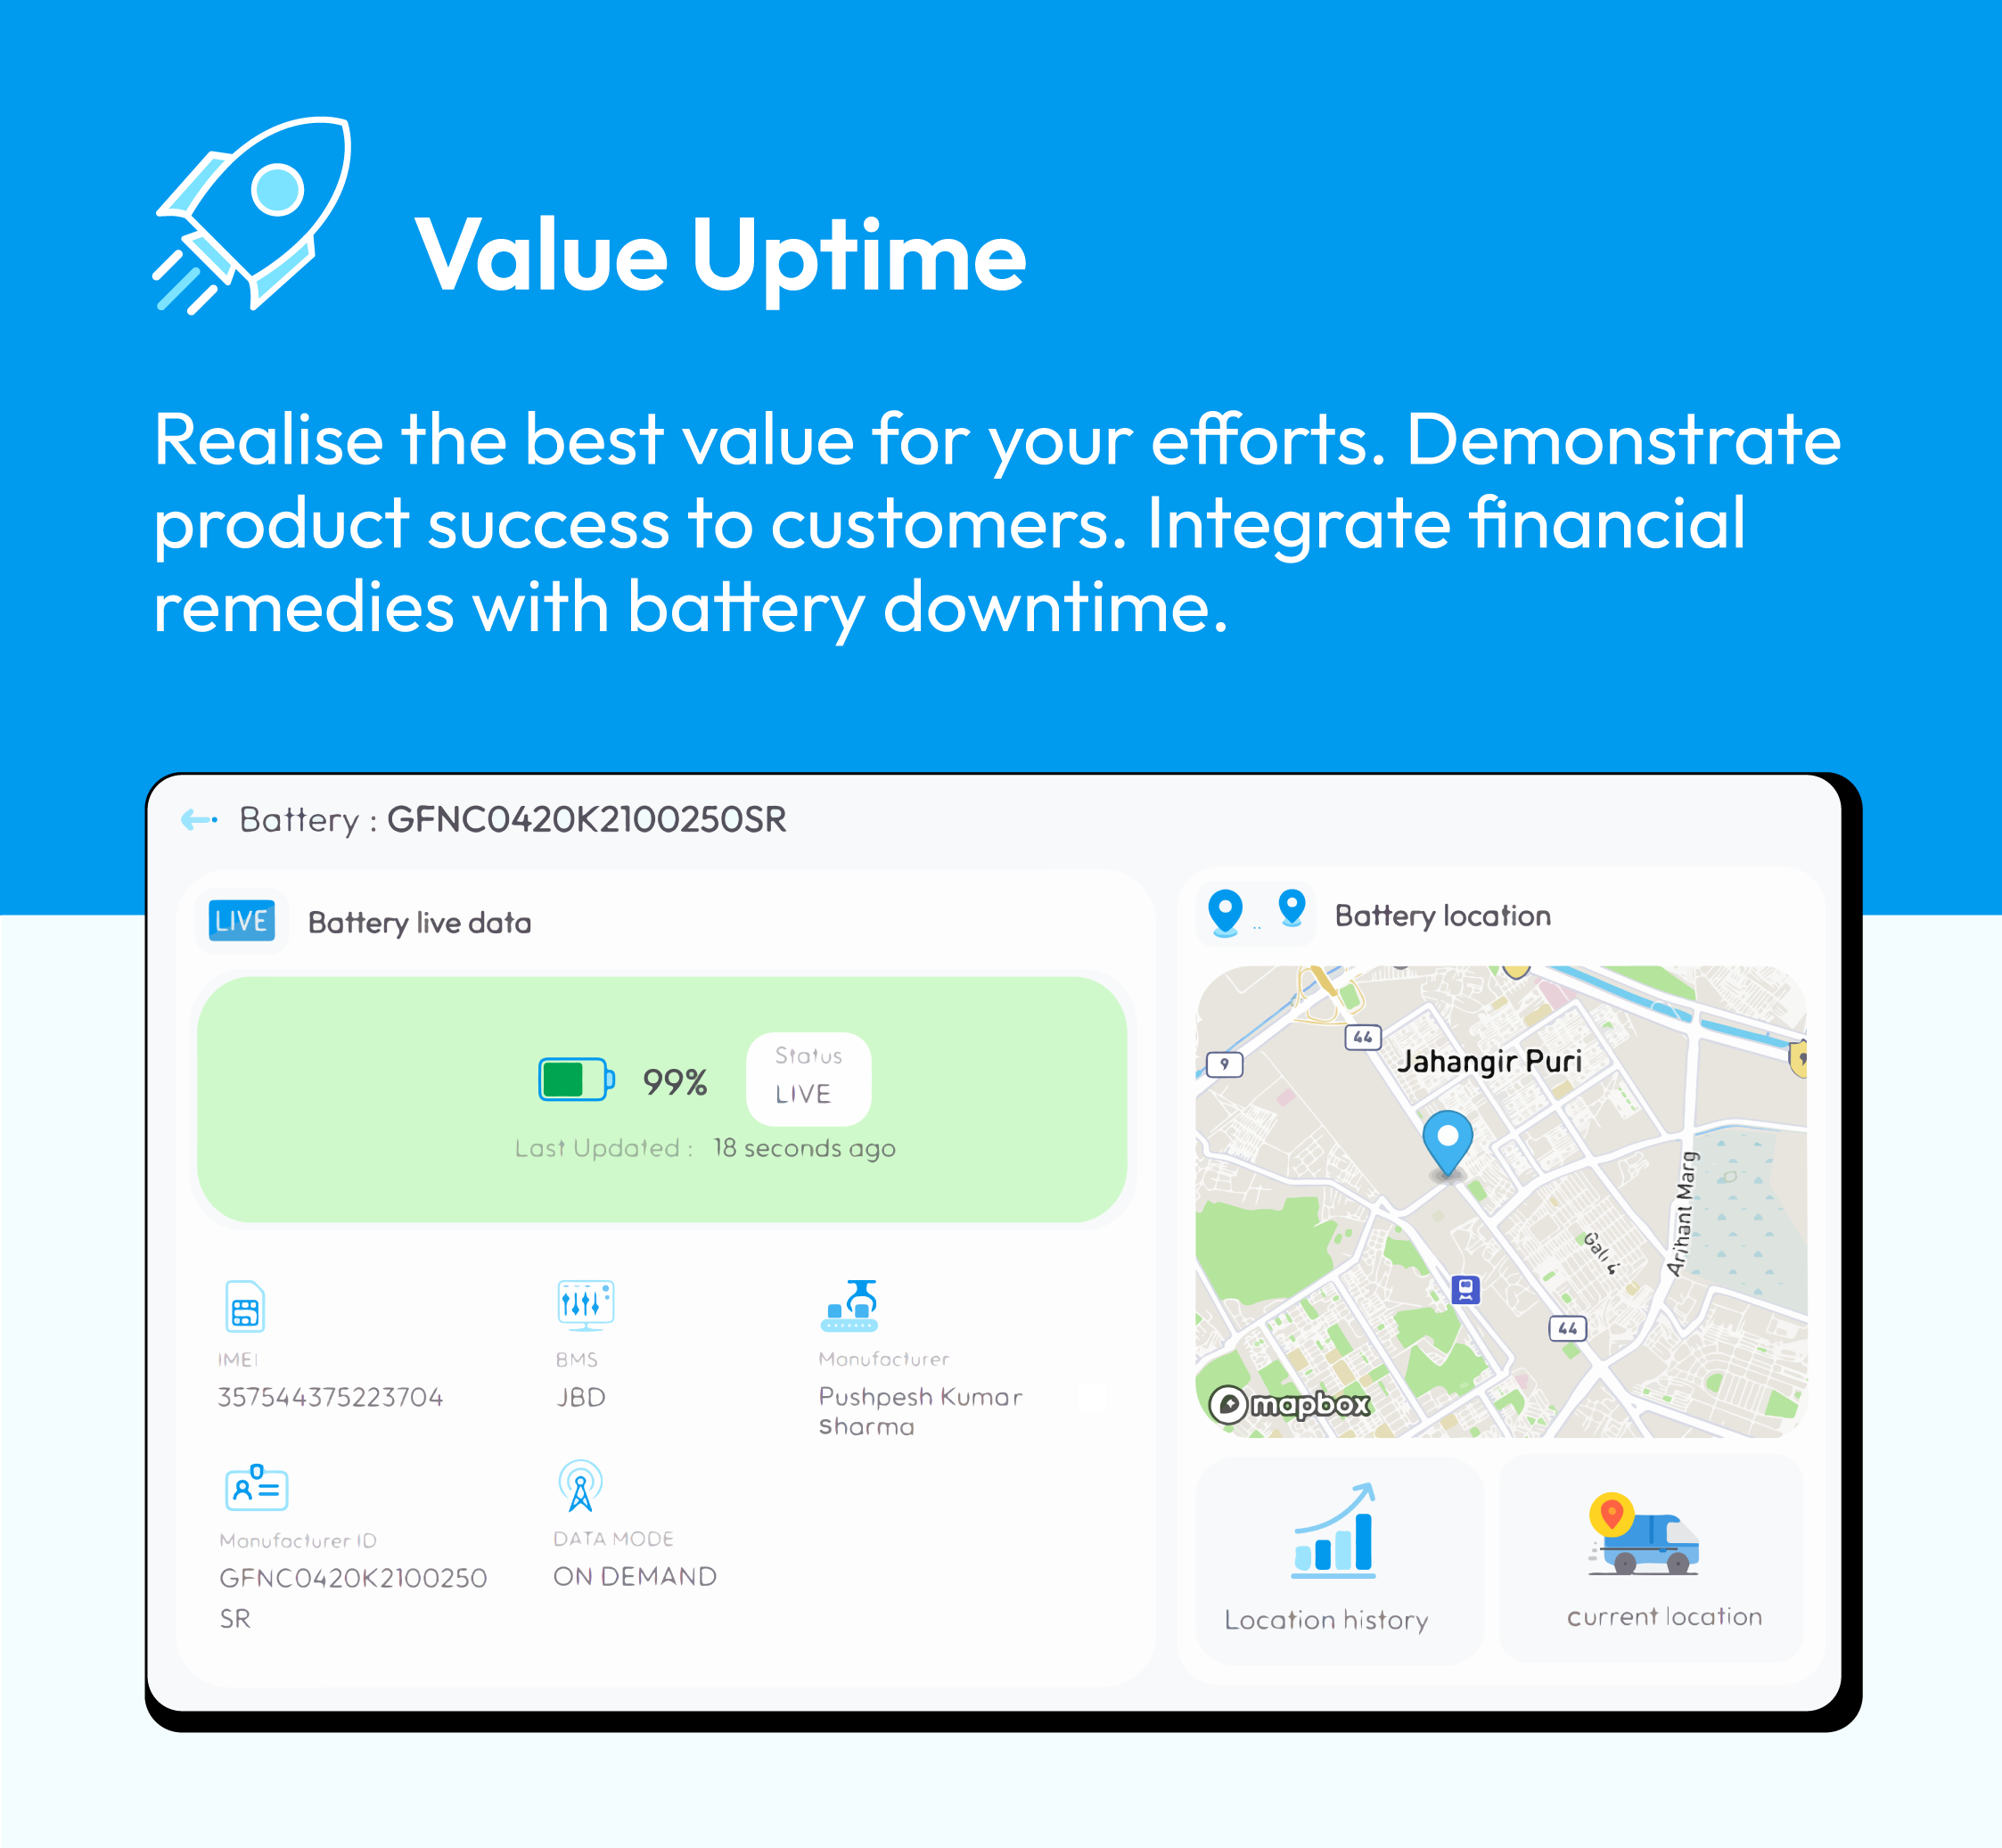 Value Uptime : Realise the best value for your efforts. Demonstrate product success to customers. Integrare financial remedies with battery downtime.